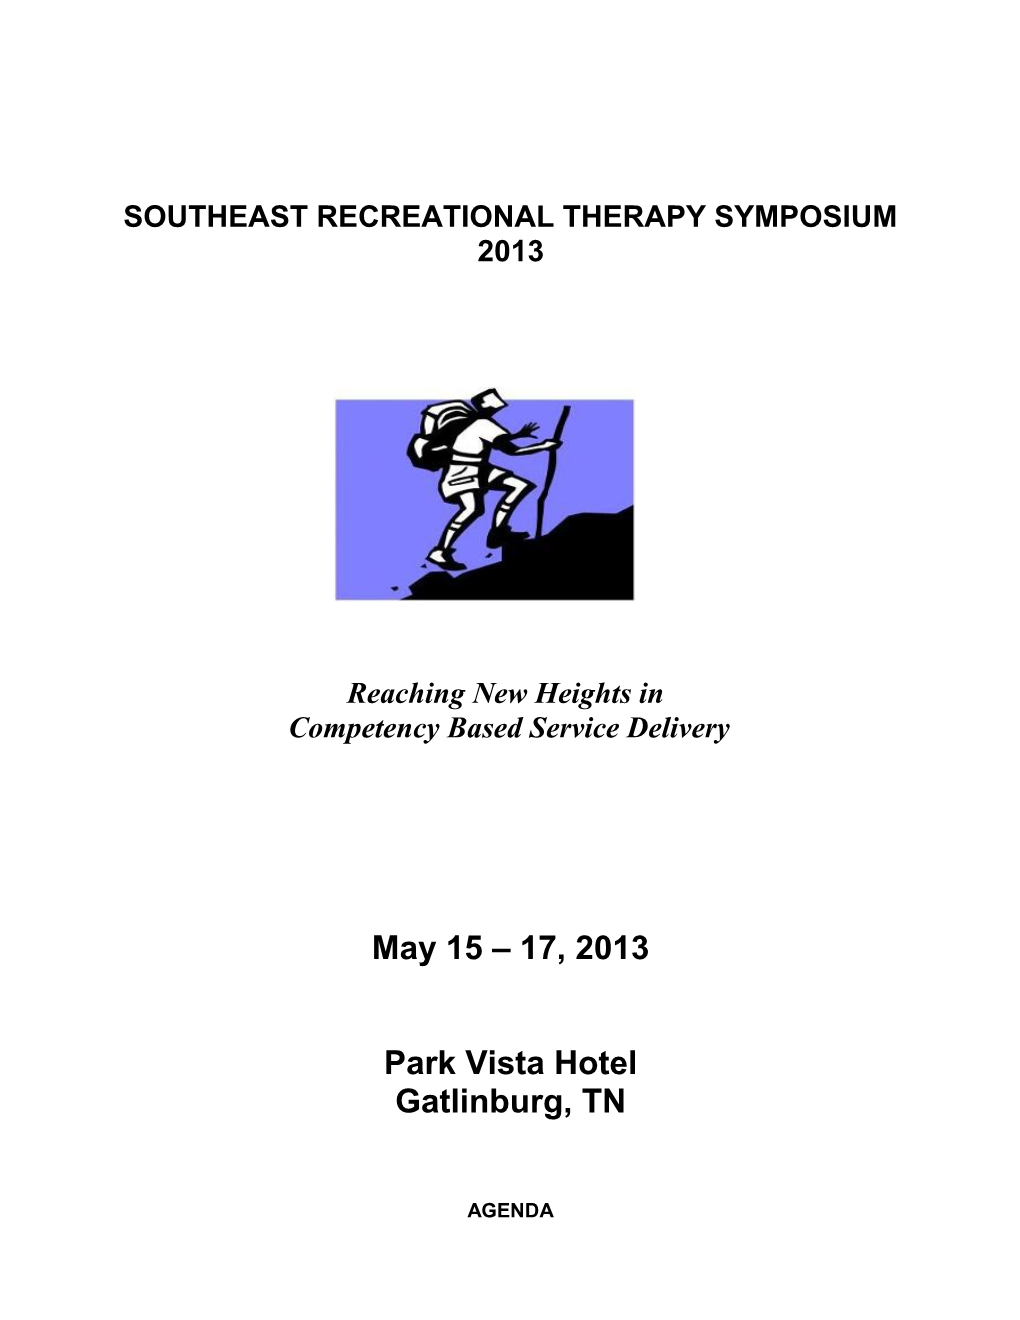 Southeast Recreational Therapy Symposium2013